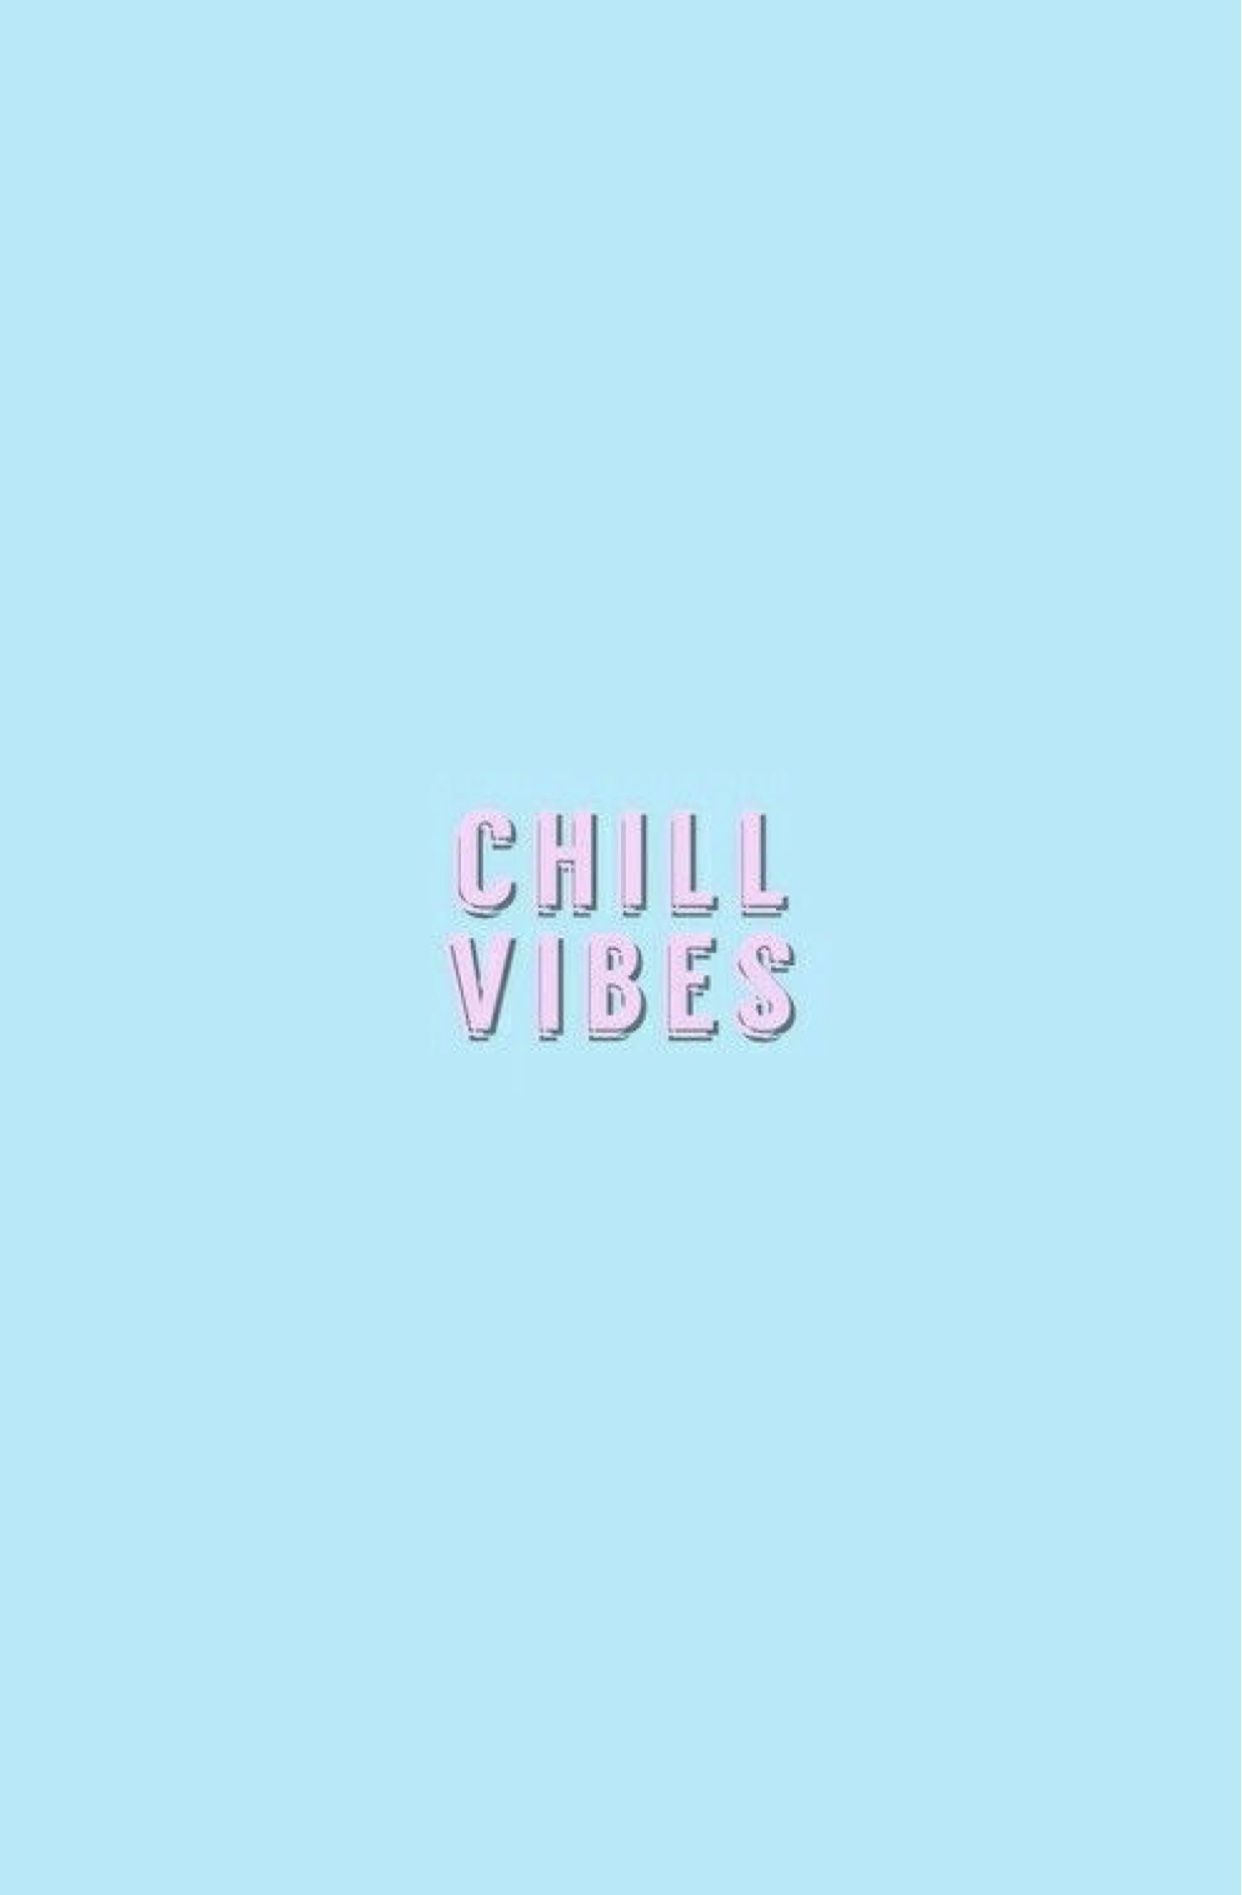 Cool Chill Vibes Wallpaper Free Cool Chill Vibes Background